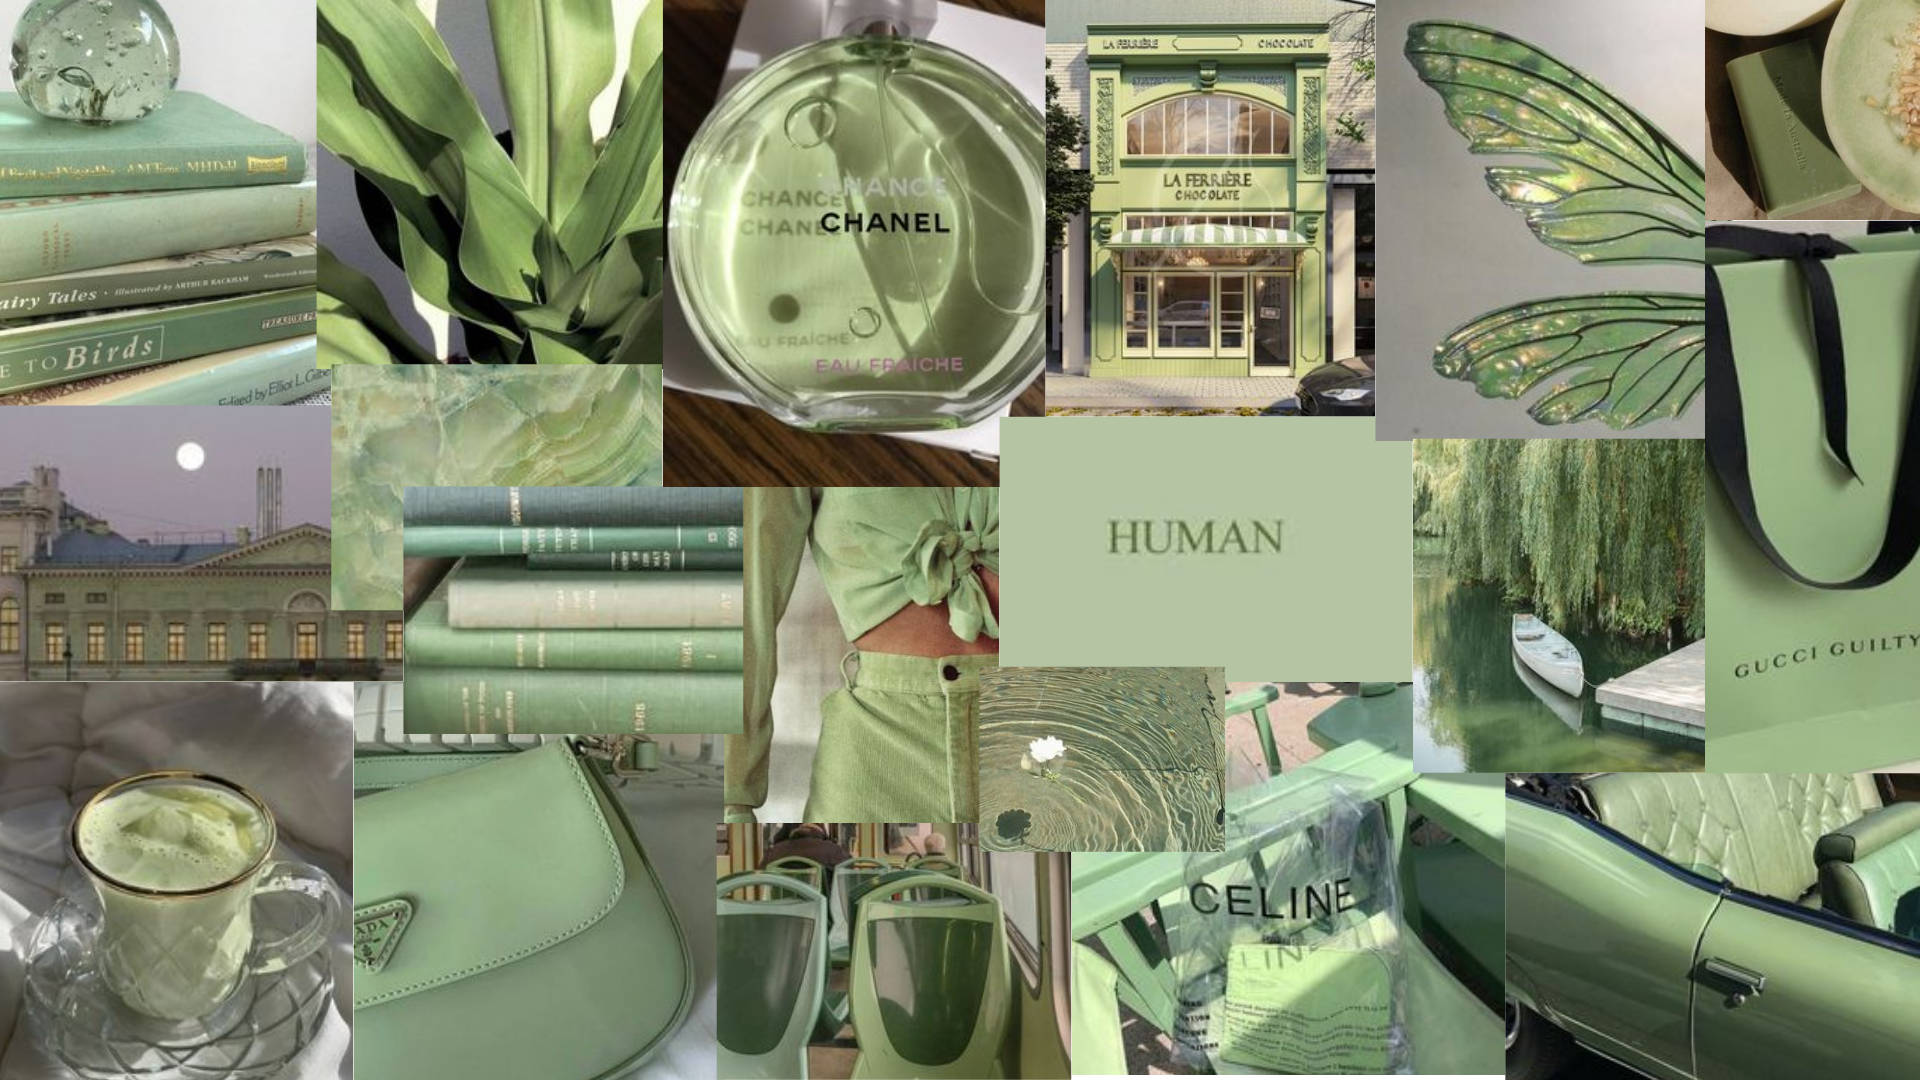 A collage of green aesthetic images including books, a Chanel bag, a butterfly, and a cup of tea. - Pastel green